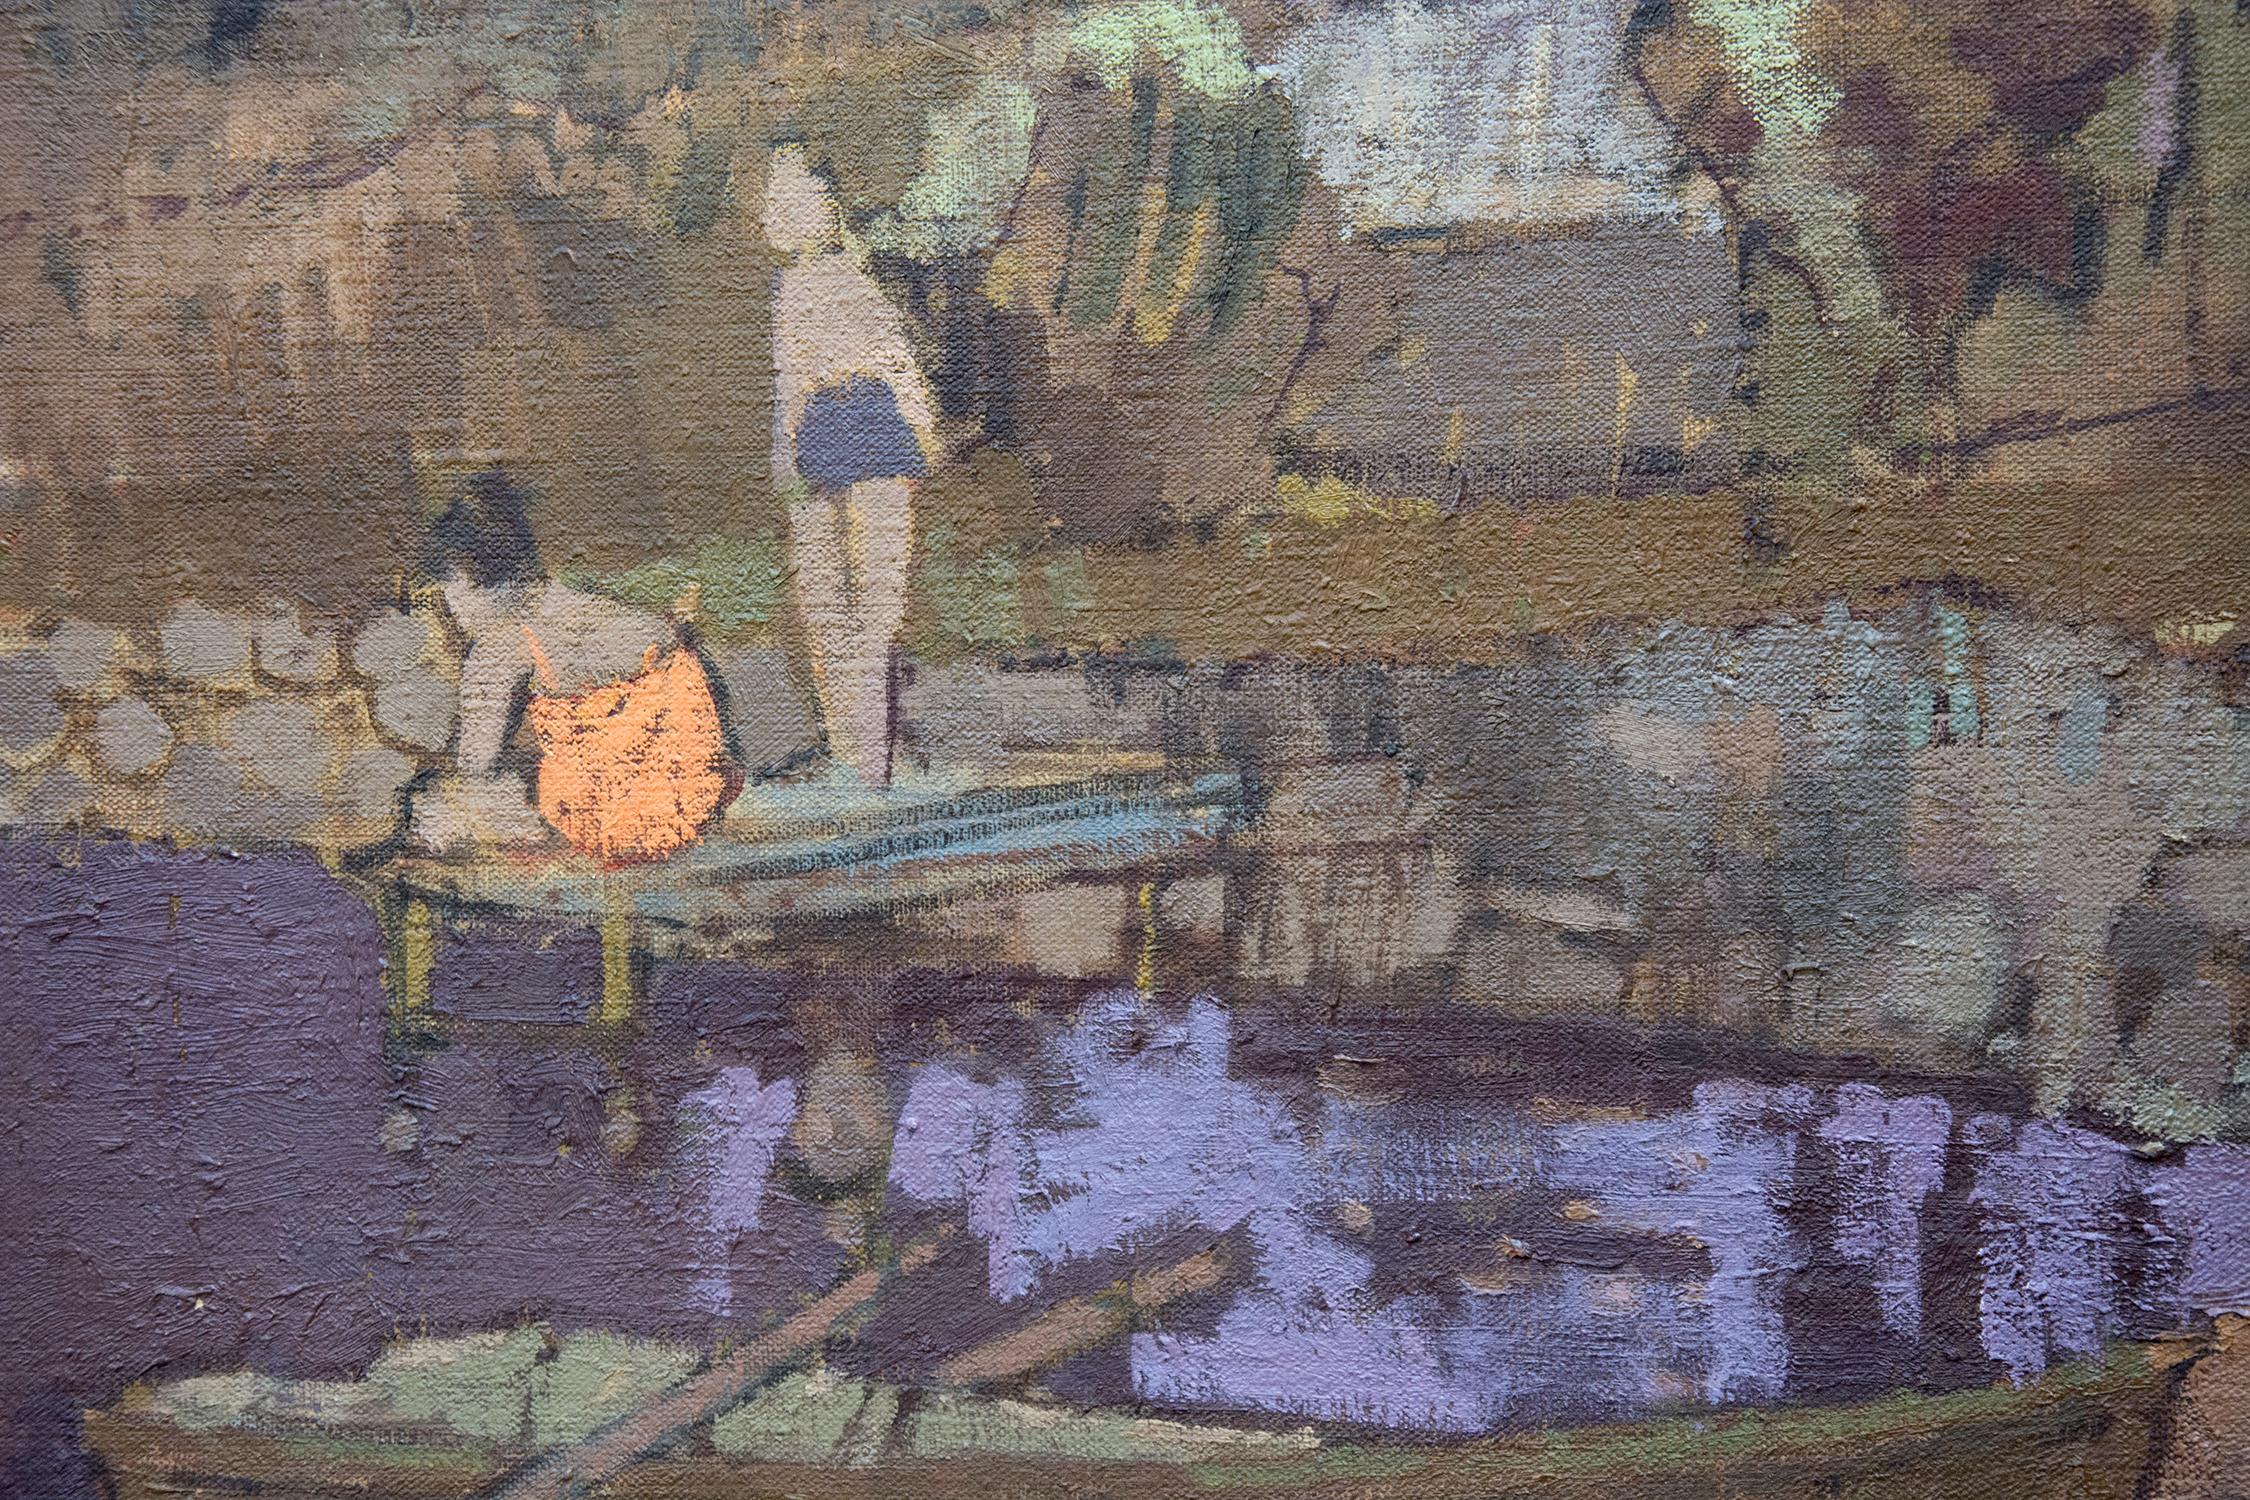 The Bathers, Quebec Countryside - Modern Painting by John Richard Fox